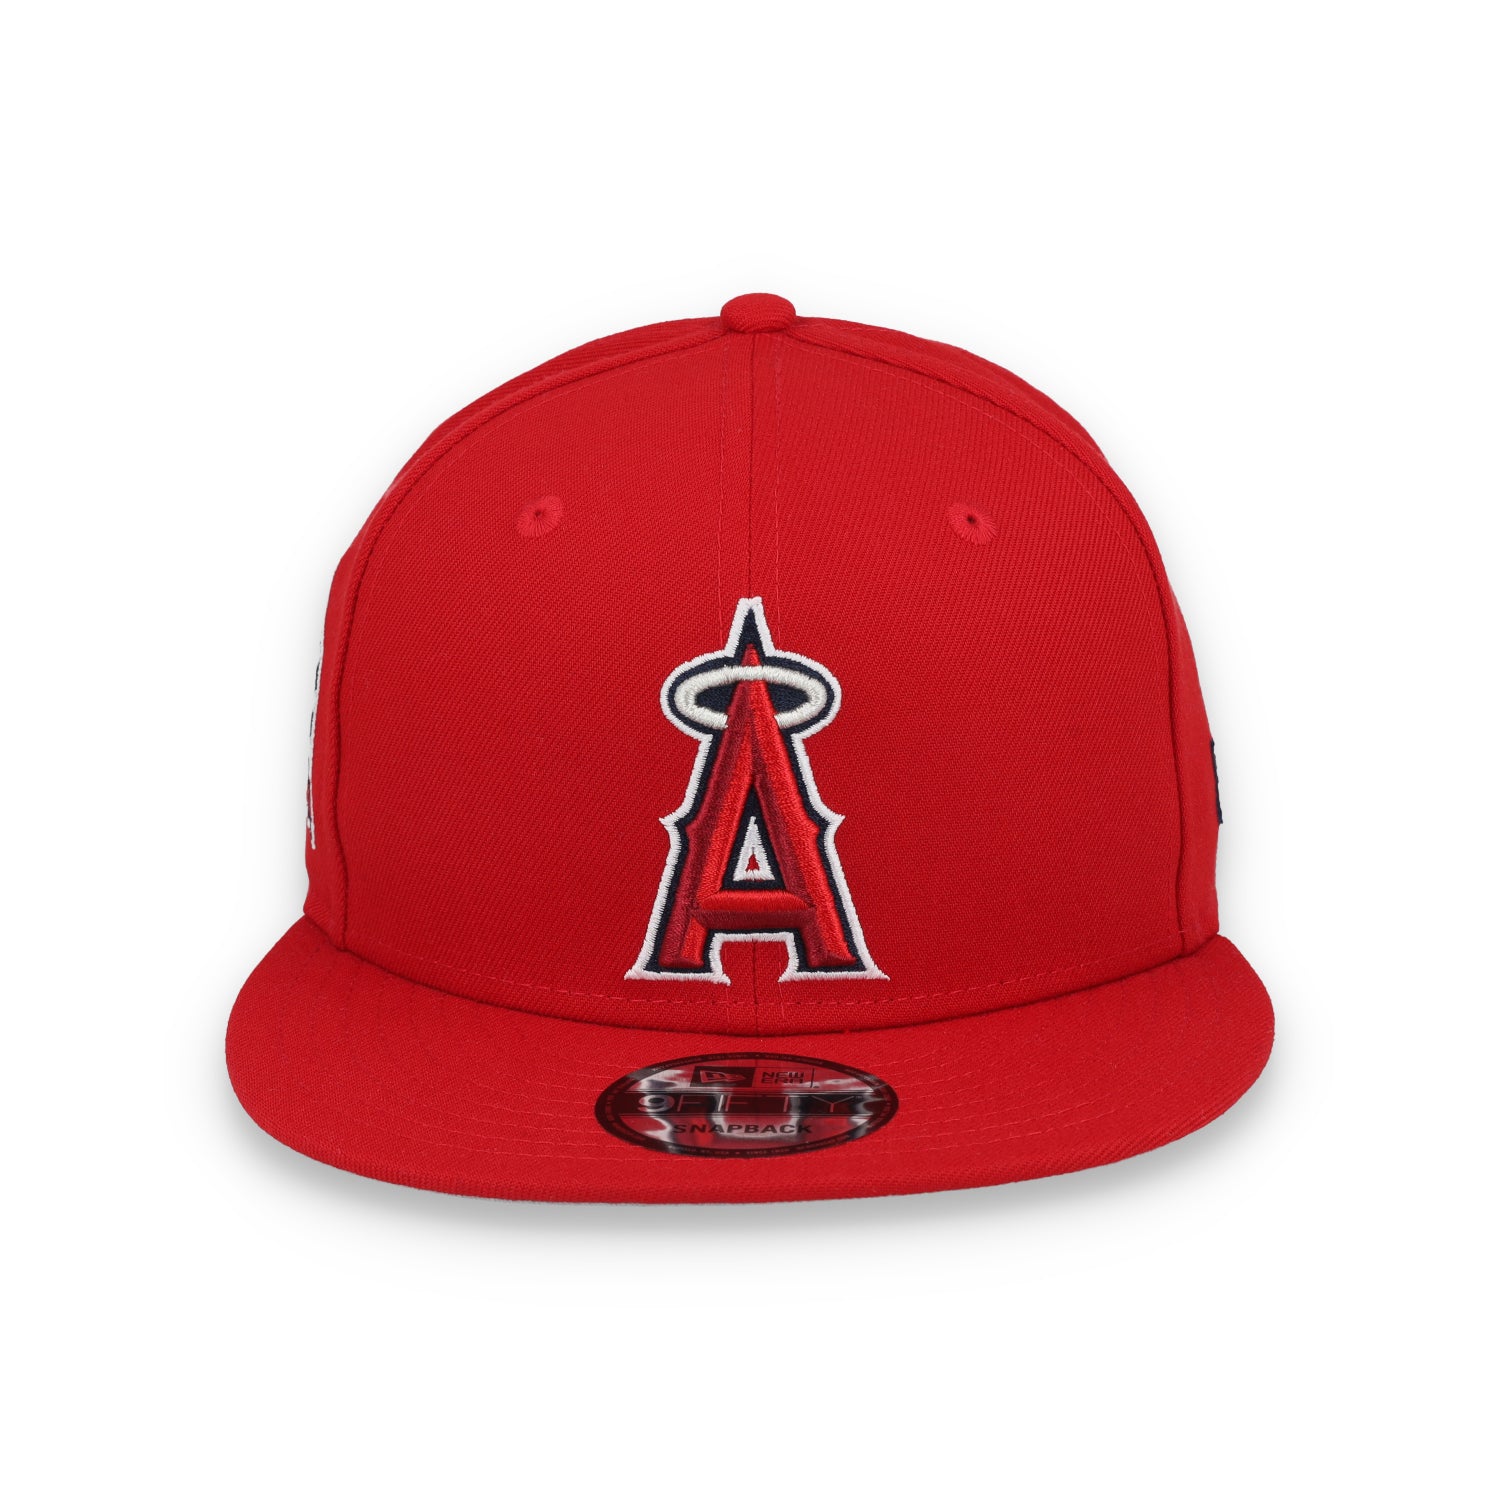 New Era Los Angeles Angels Patch E3 9FIFTY Snapback Hat